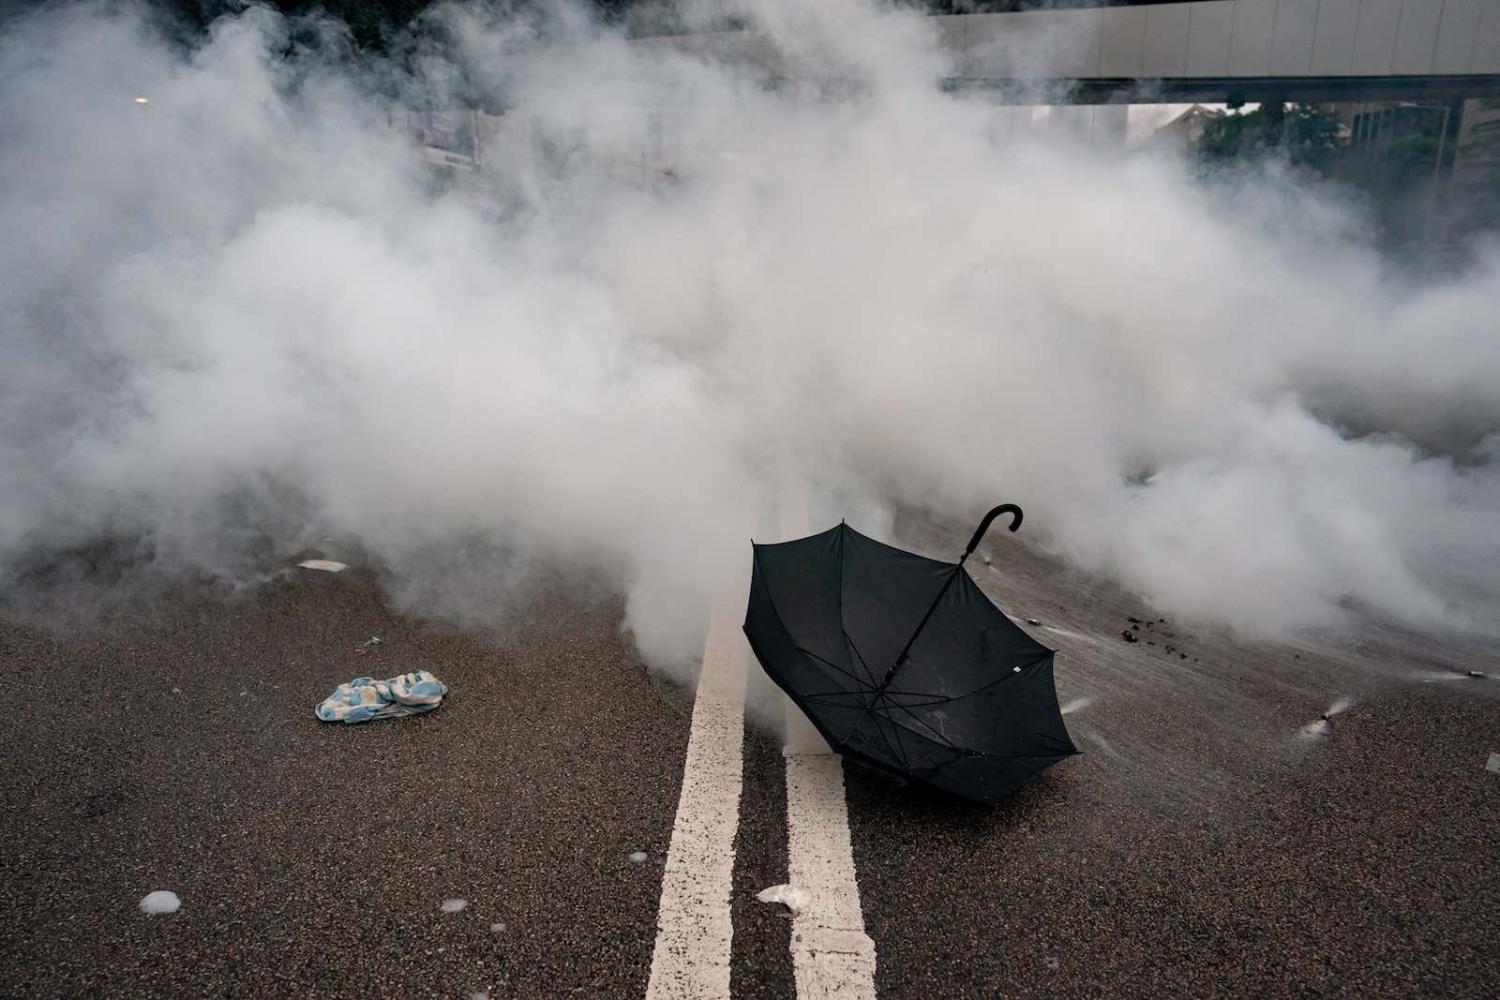 Recent violence shows Hong Kong Police Force – once heralded as “Asia’s finest” – have become partisan political enforcers (Photo: Anthony Kwan/Getty)